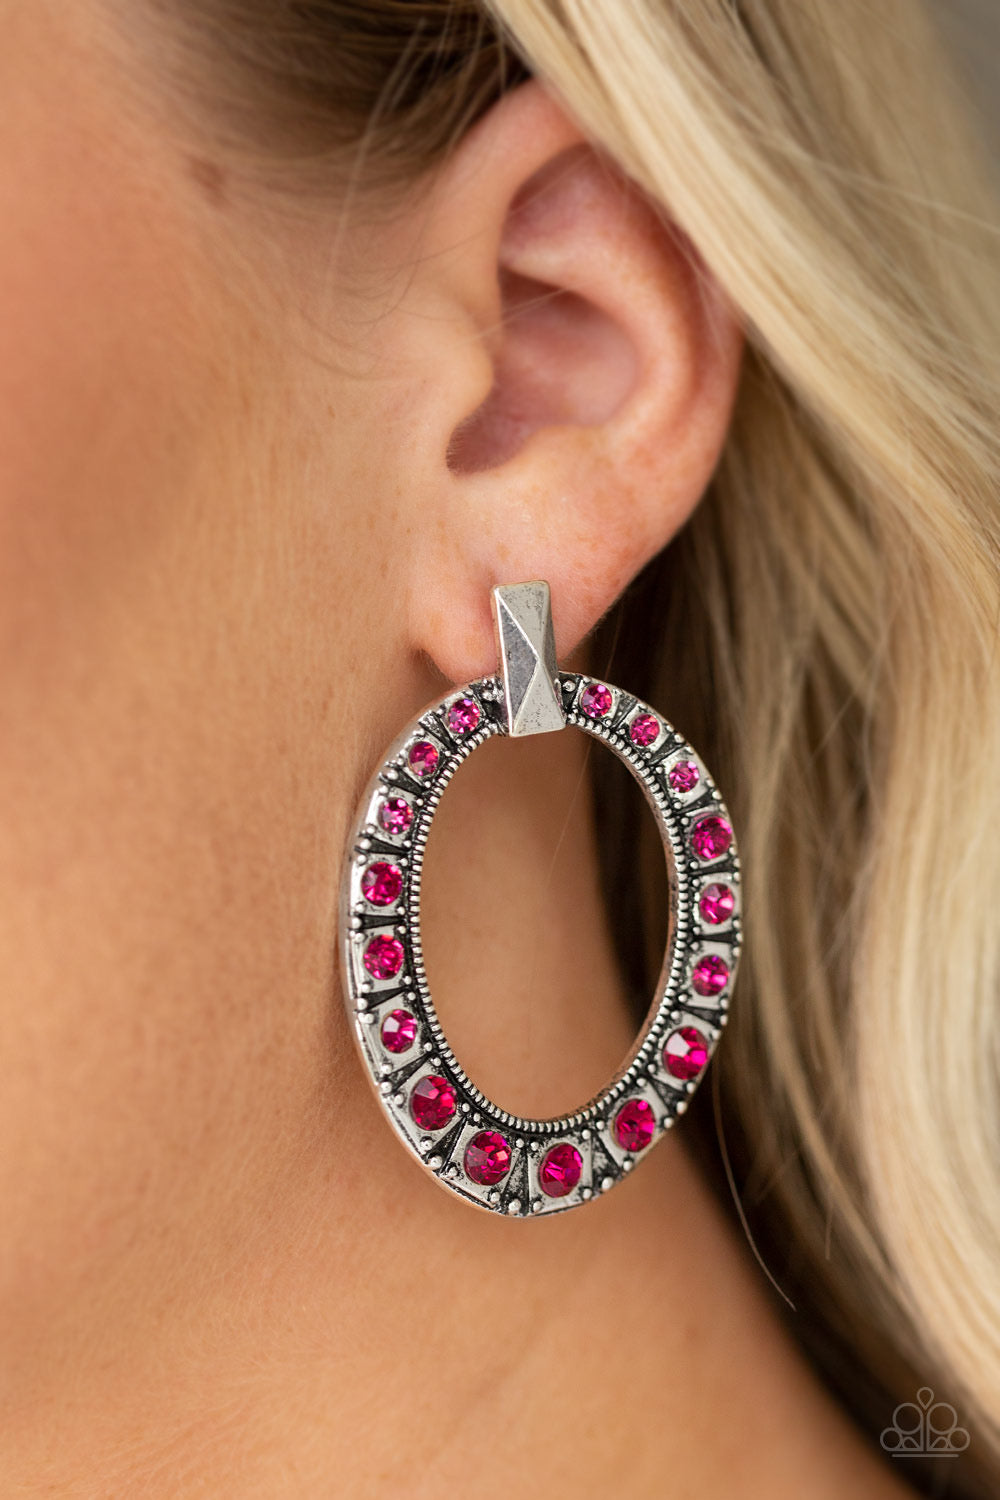 All For GLOW - Pink Earrings 2504e